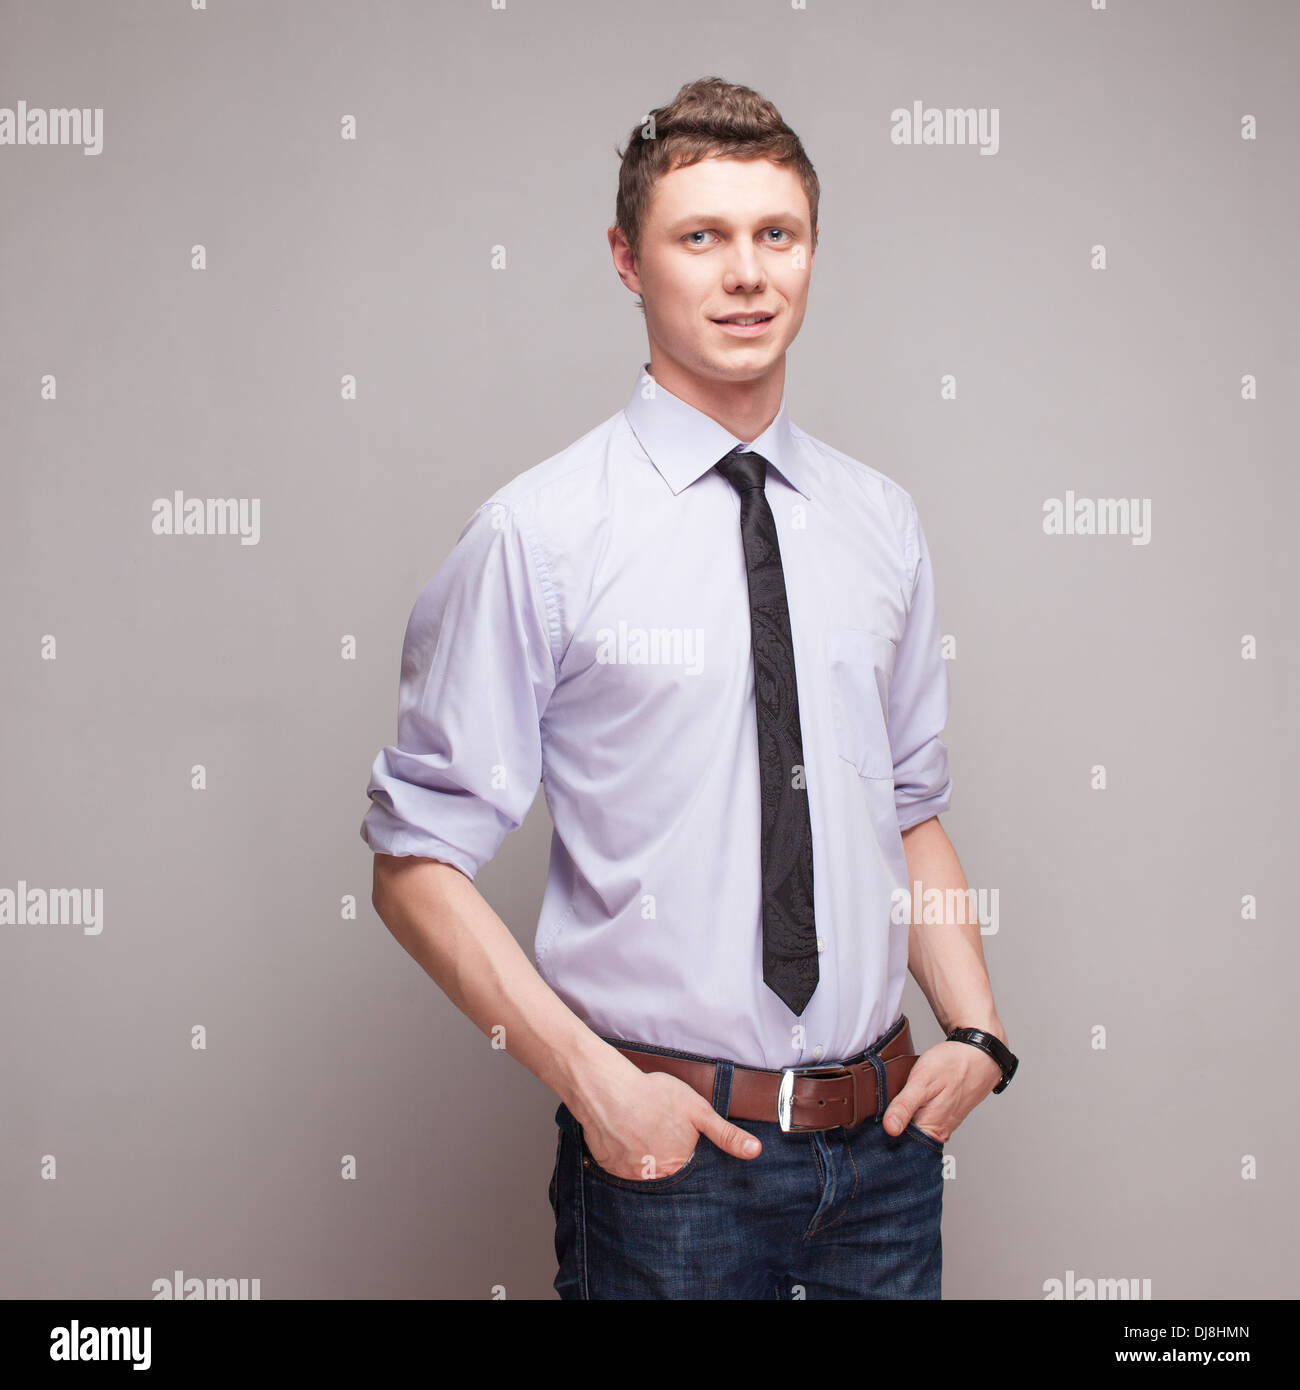 square portrait of cheerful young man in blue shirt with tie and jeans Stock Photo